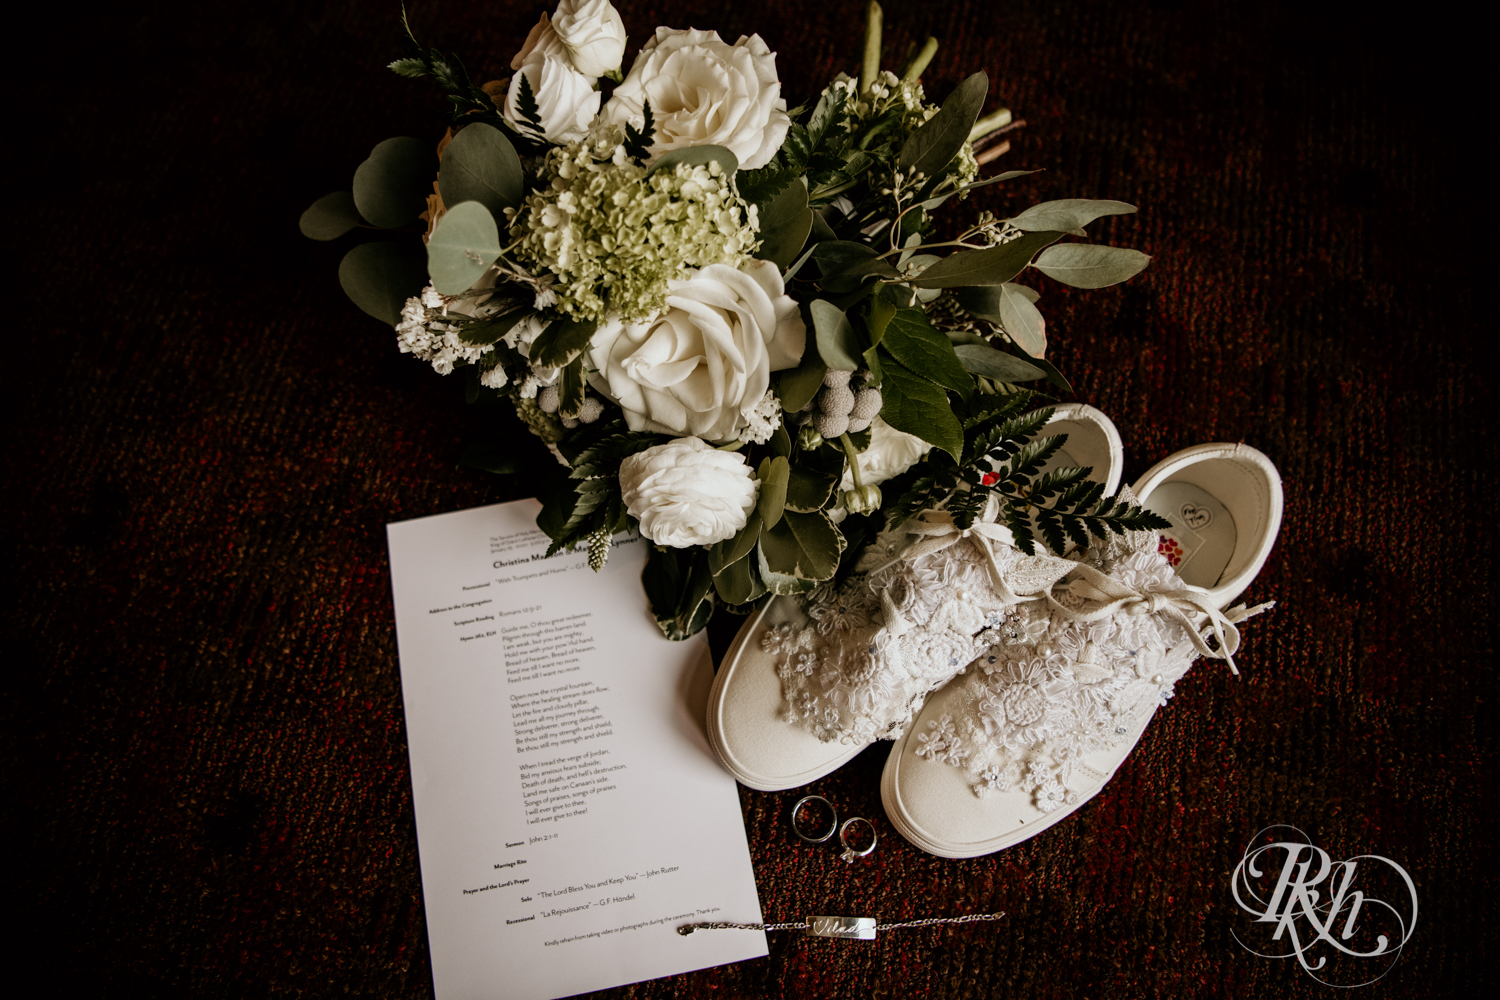 Wedding details including invitation, shoes, flowers and rings in Golden Valley, Minnesota. 